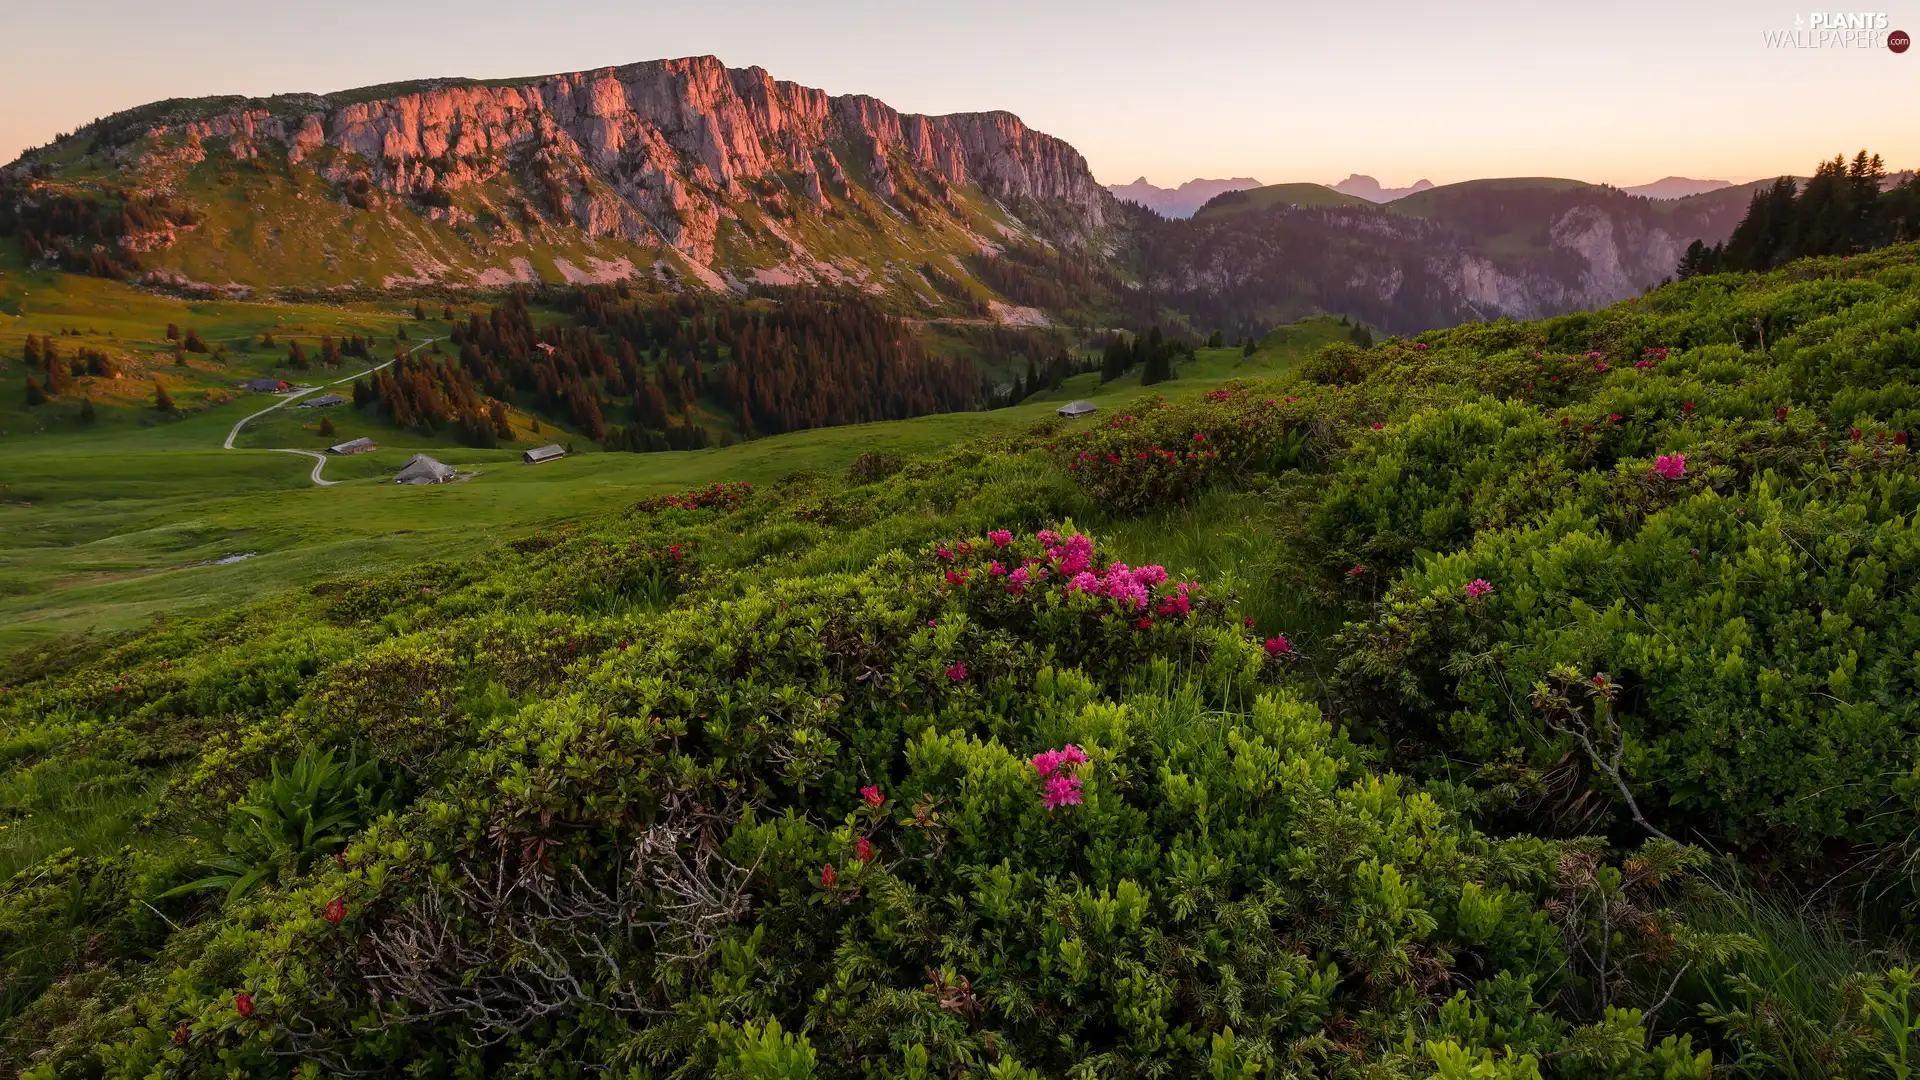 Valley, woods, Switzerland, Flowers, Canton of Bern, Alps, Mountains, Rhododendron